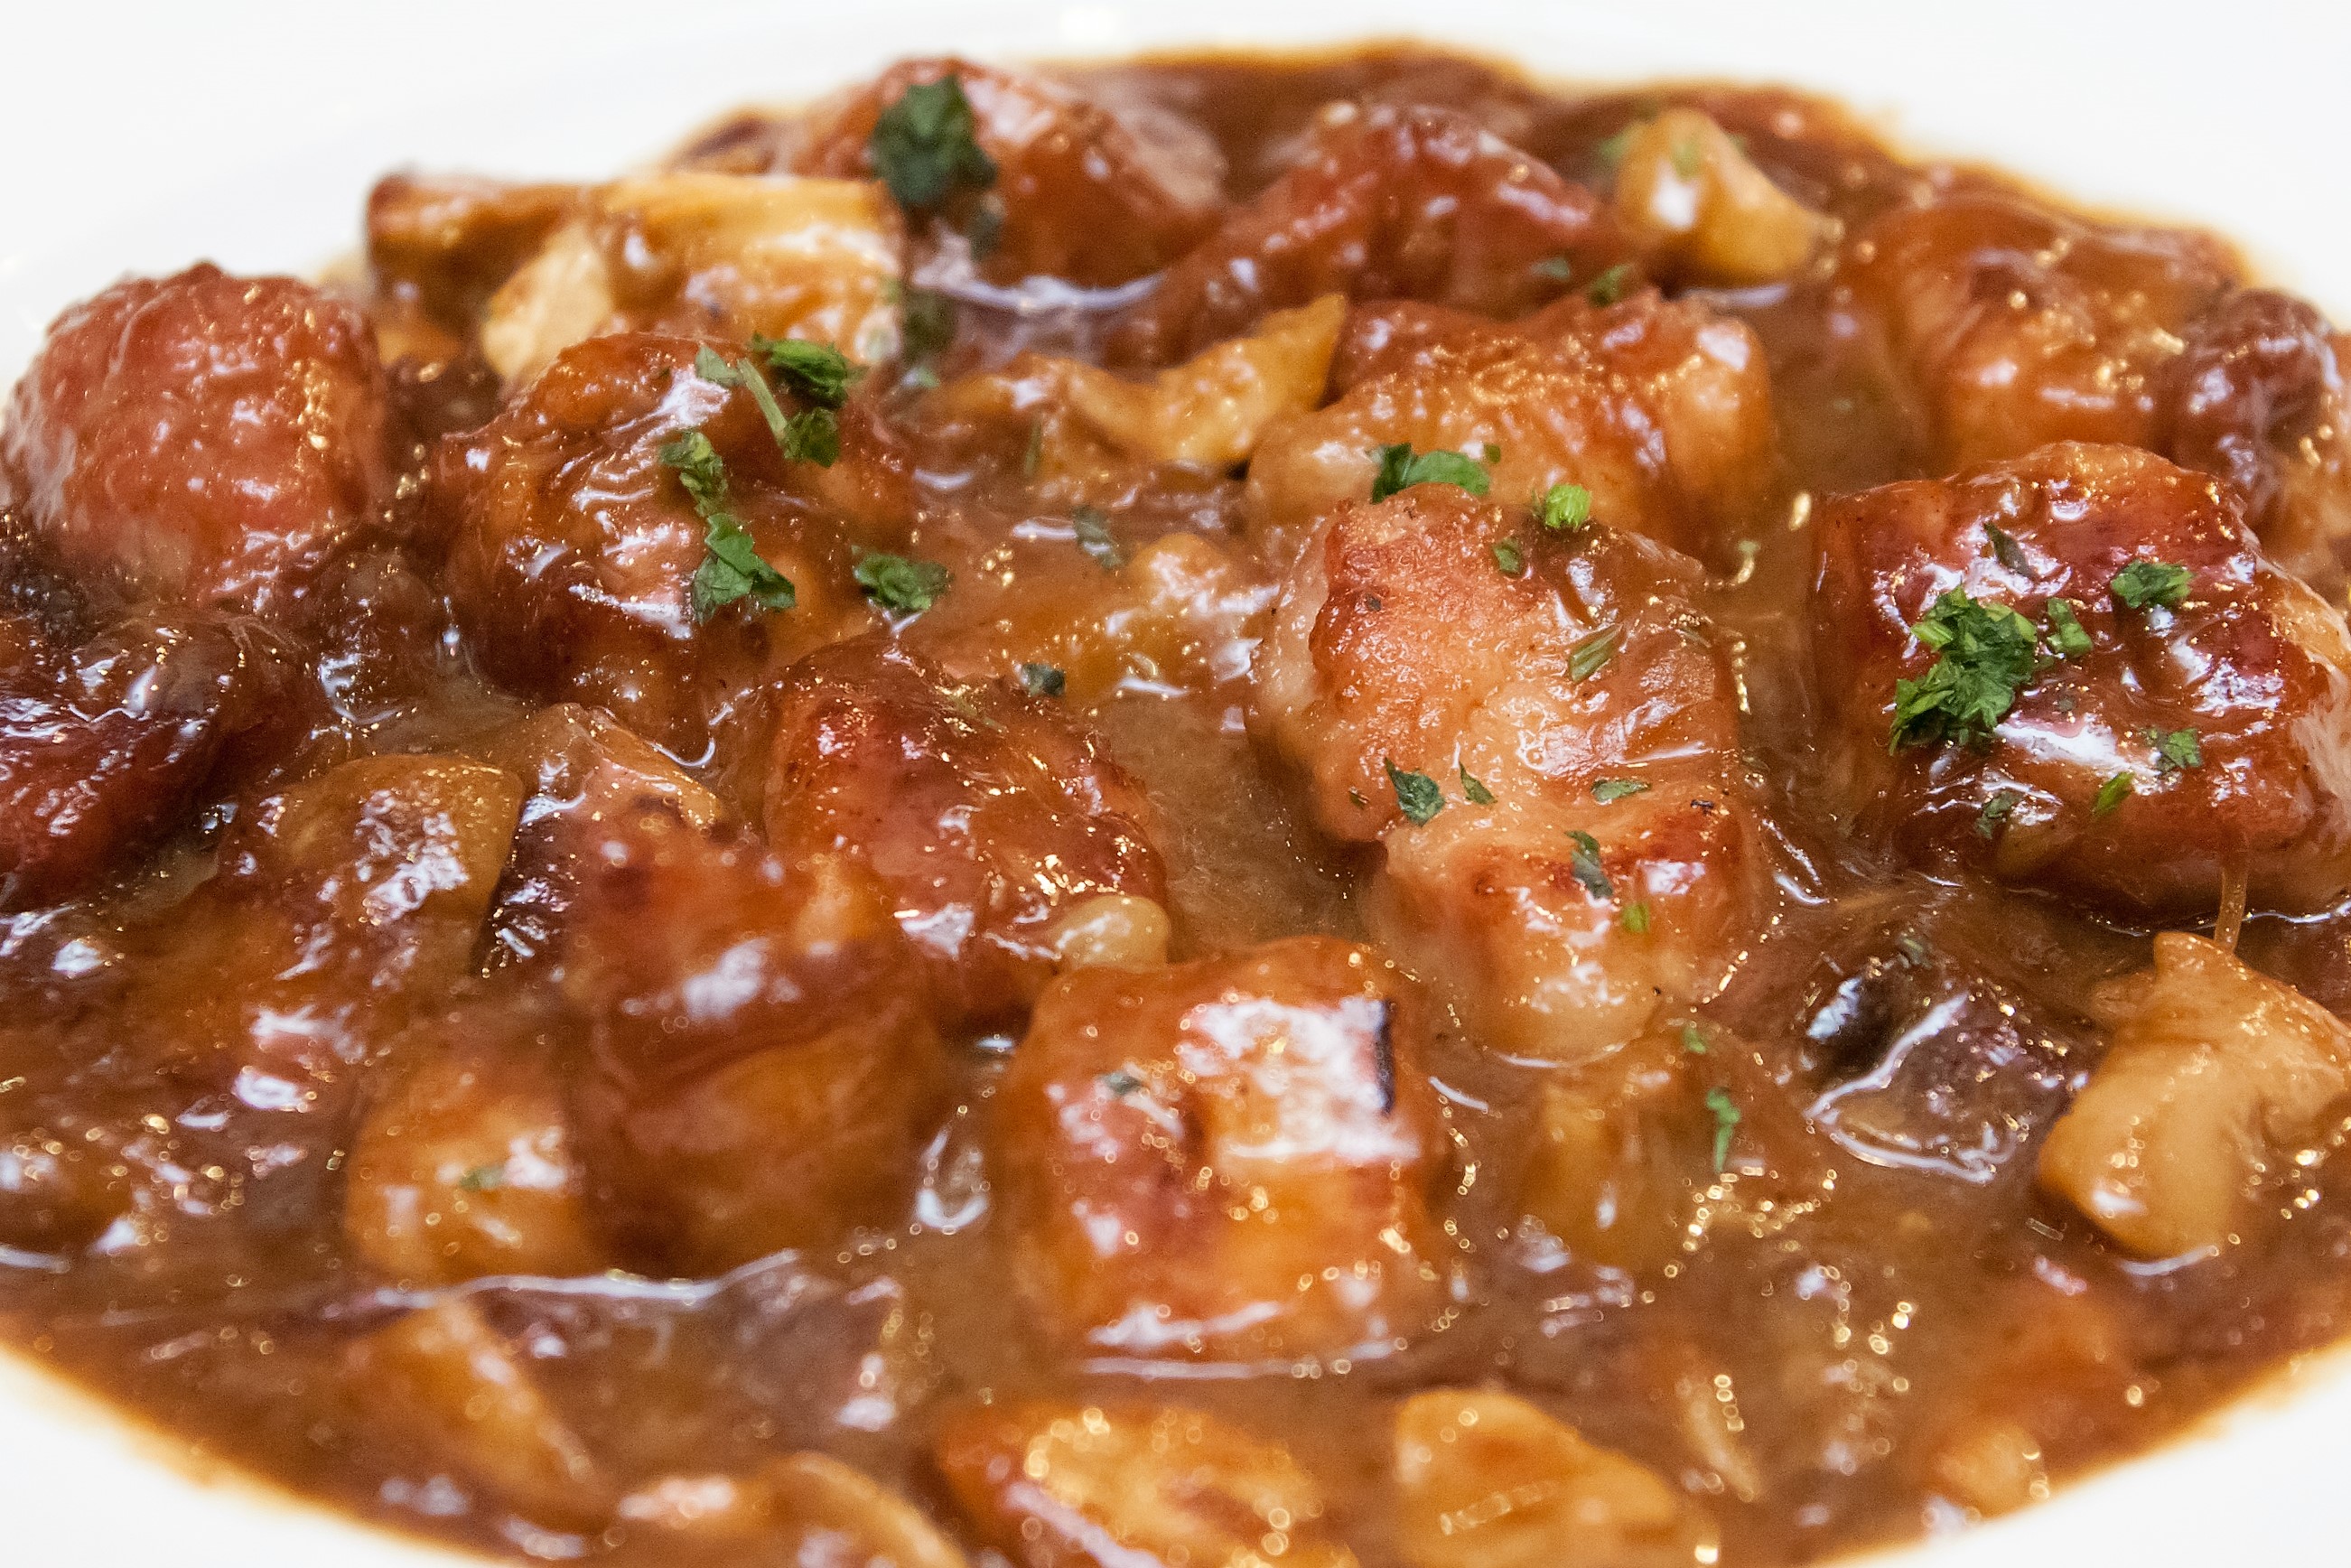 Veal sweetbreads with Bordelaise sauce